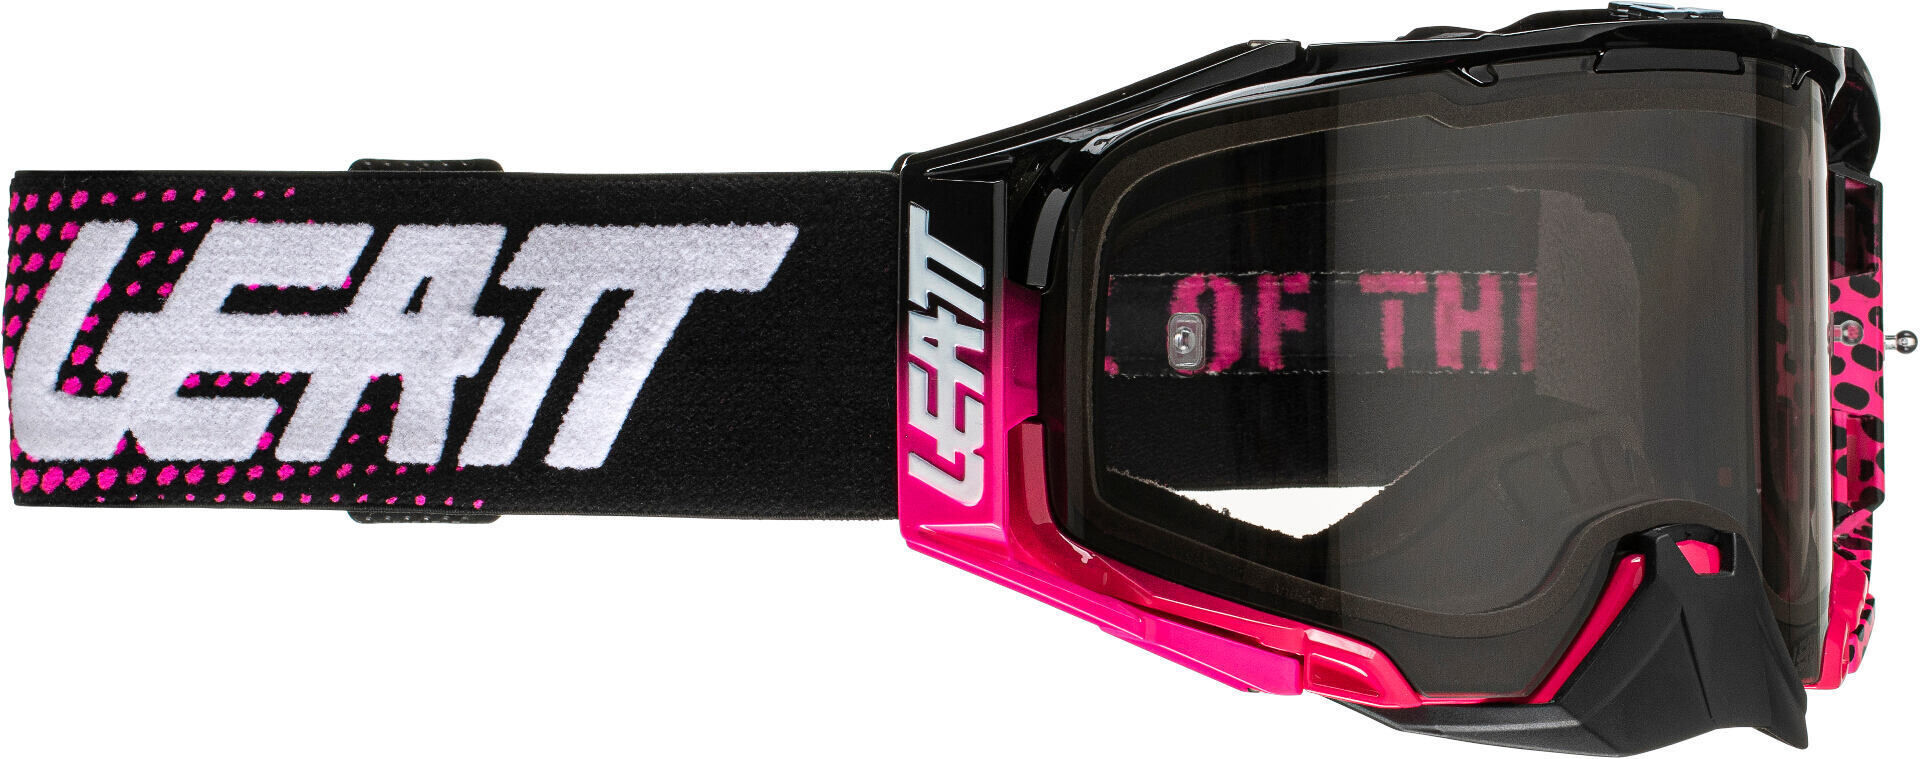 Photos - Motorcycle Goggles / Face Mask Leatt Velocity 6.5 Neon Motocross Goggles Unisex Pink Size: One Size dl101 